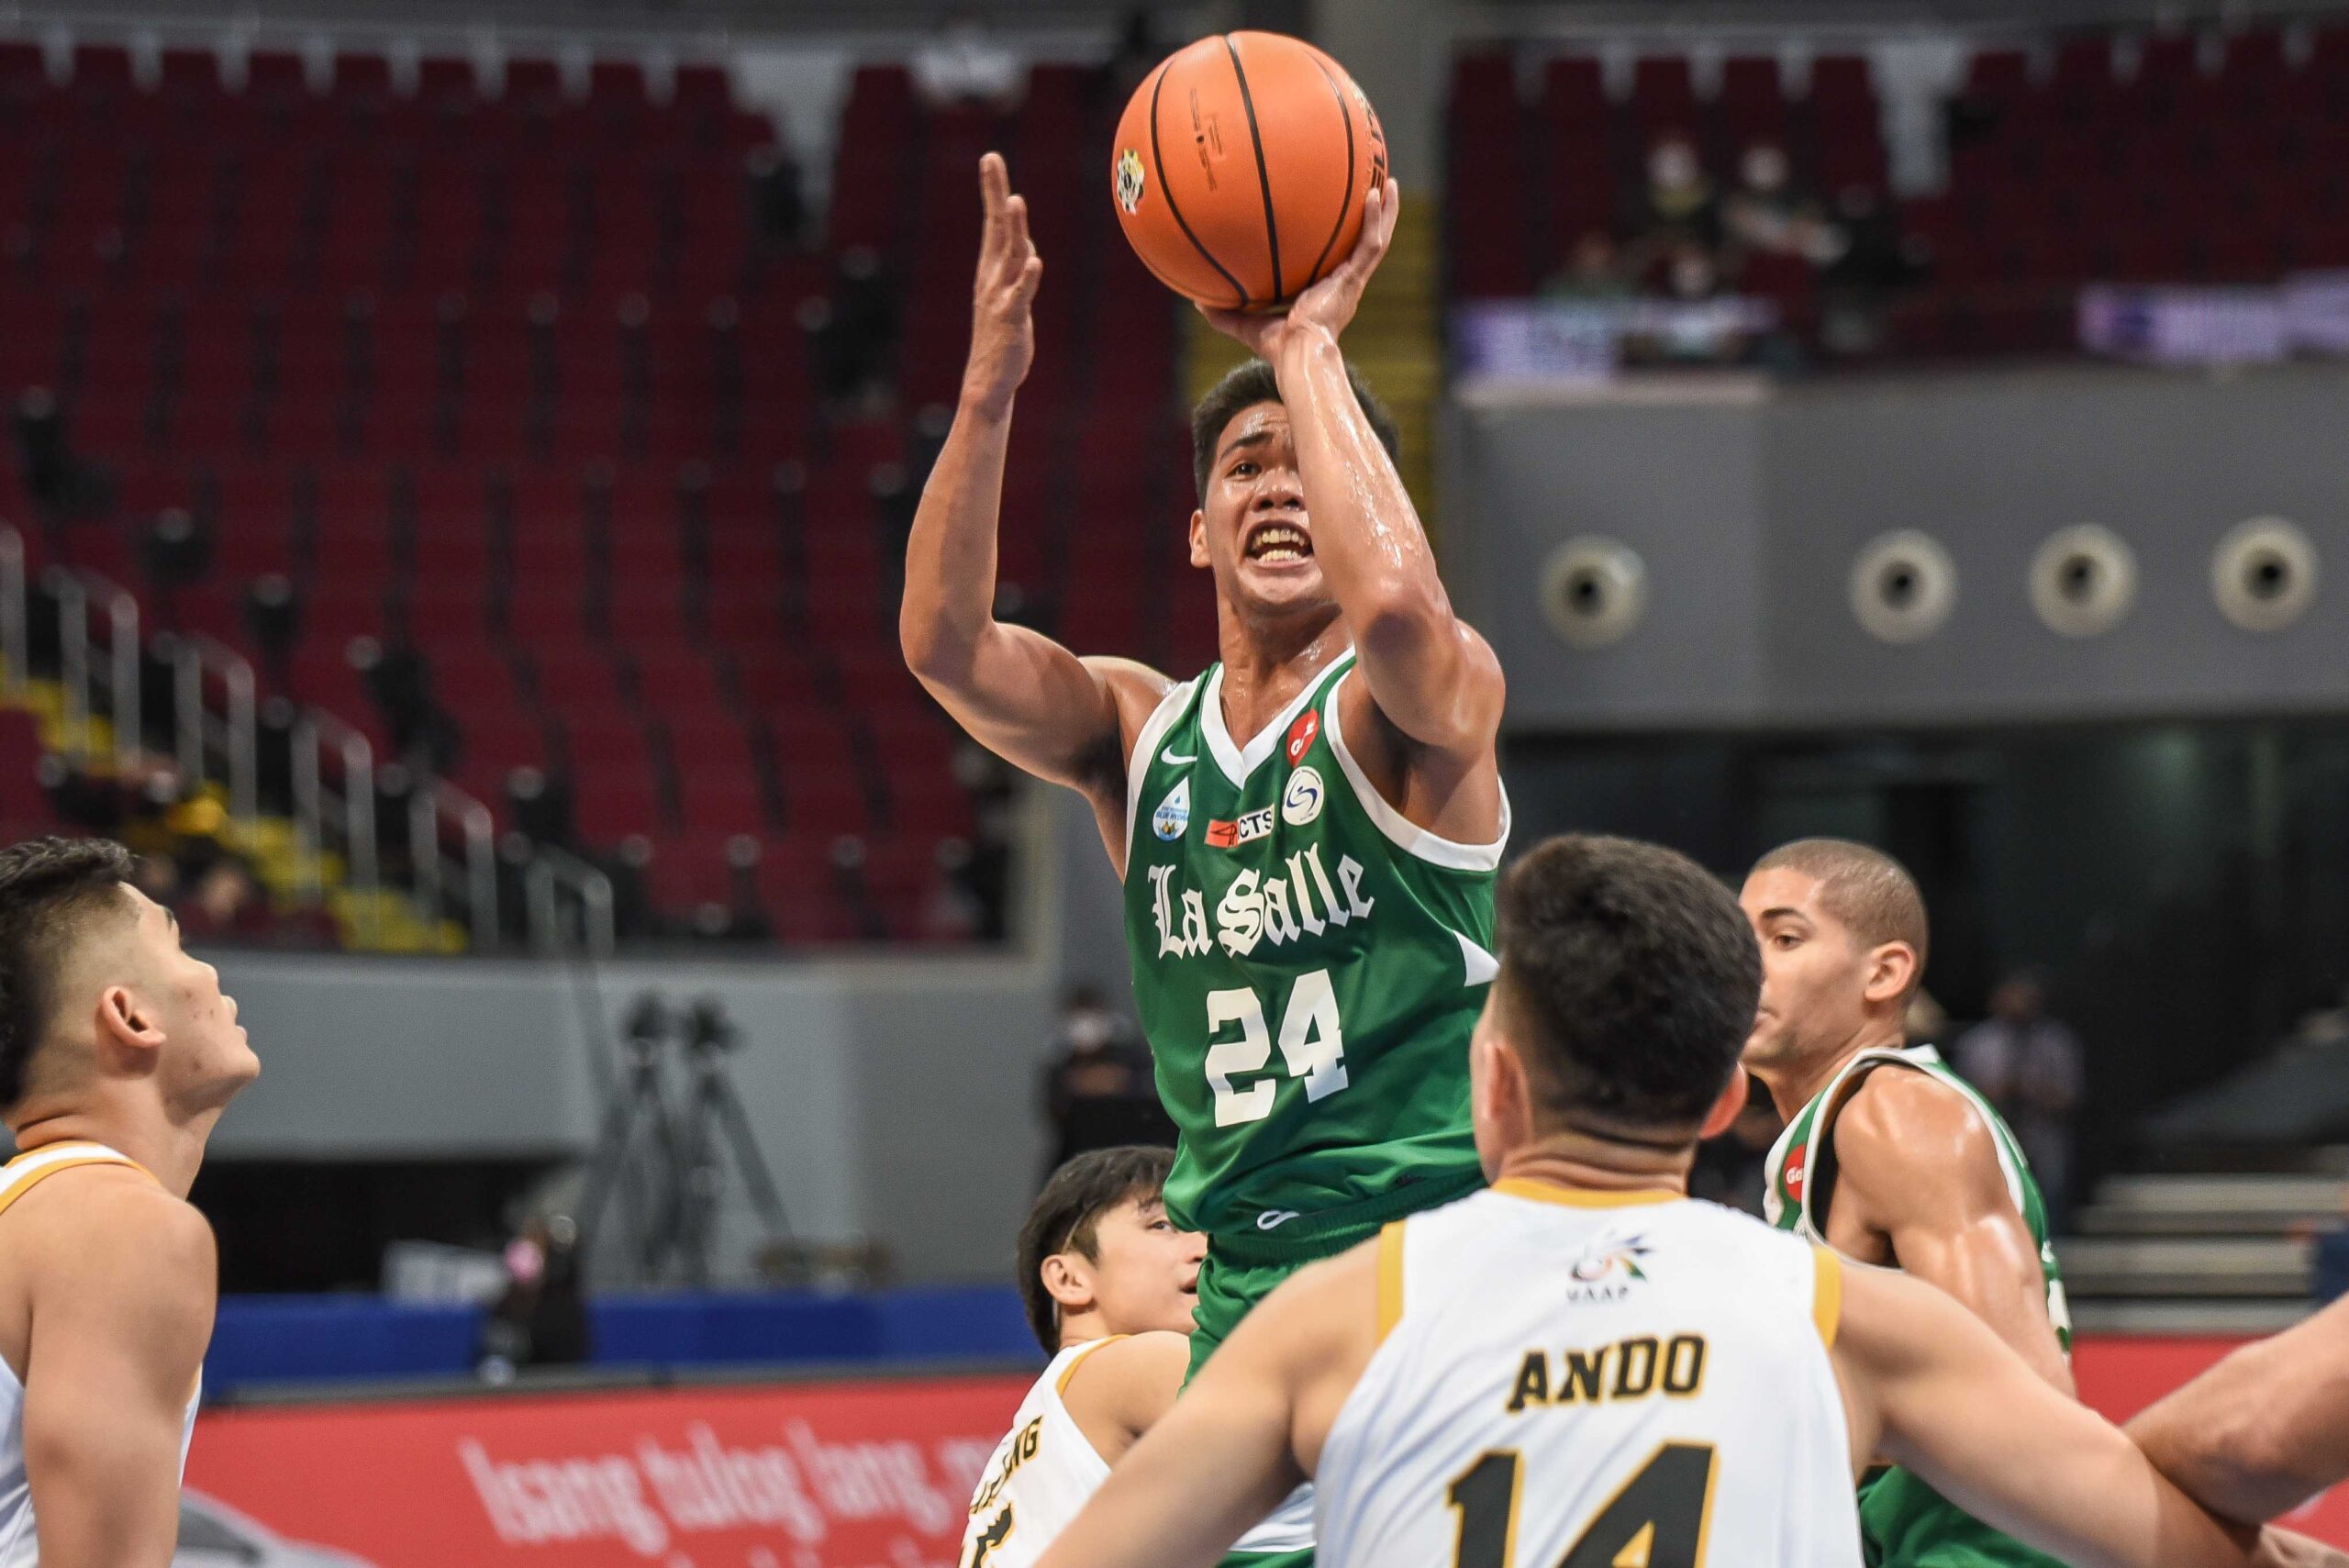 Mark Nonoy admits emotions took over in 3-point showing against old UST team